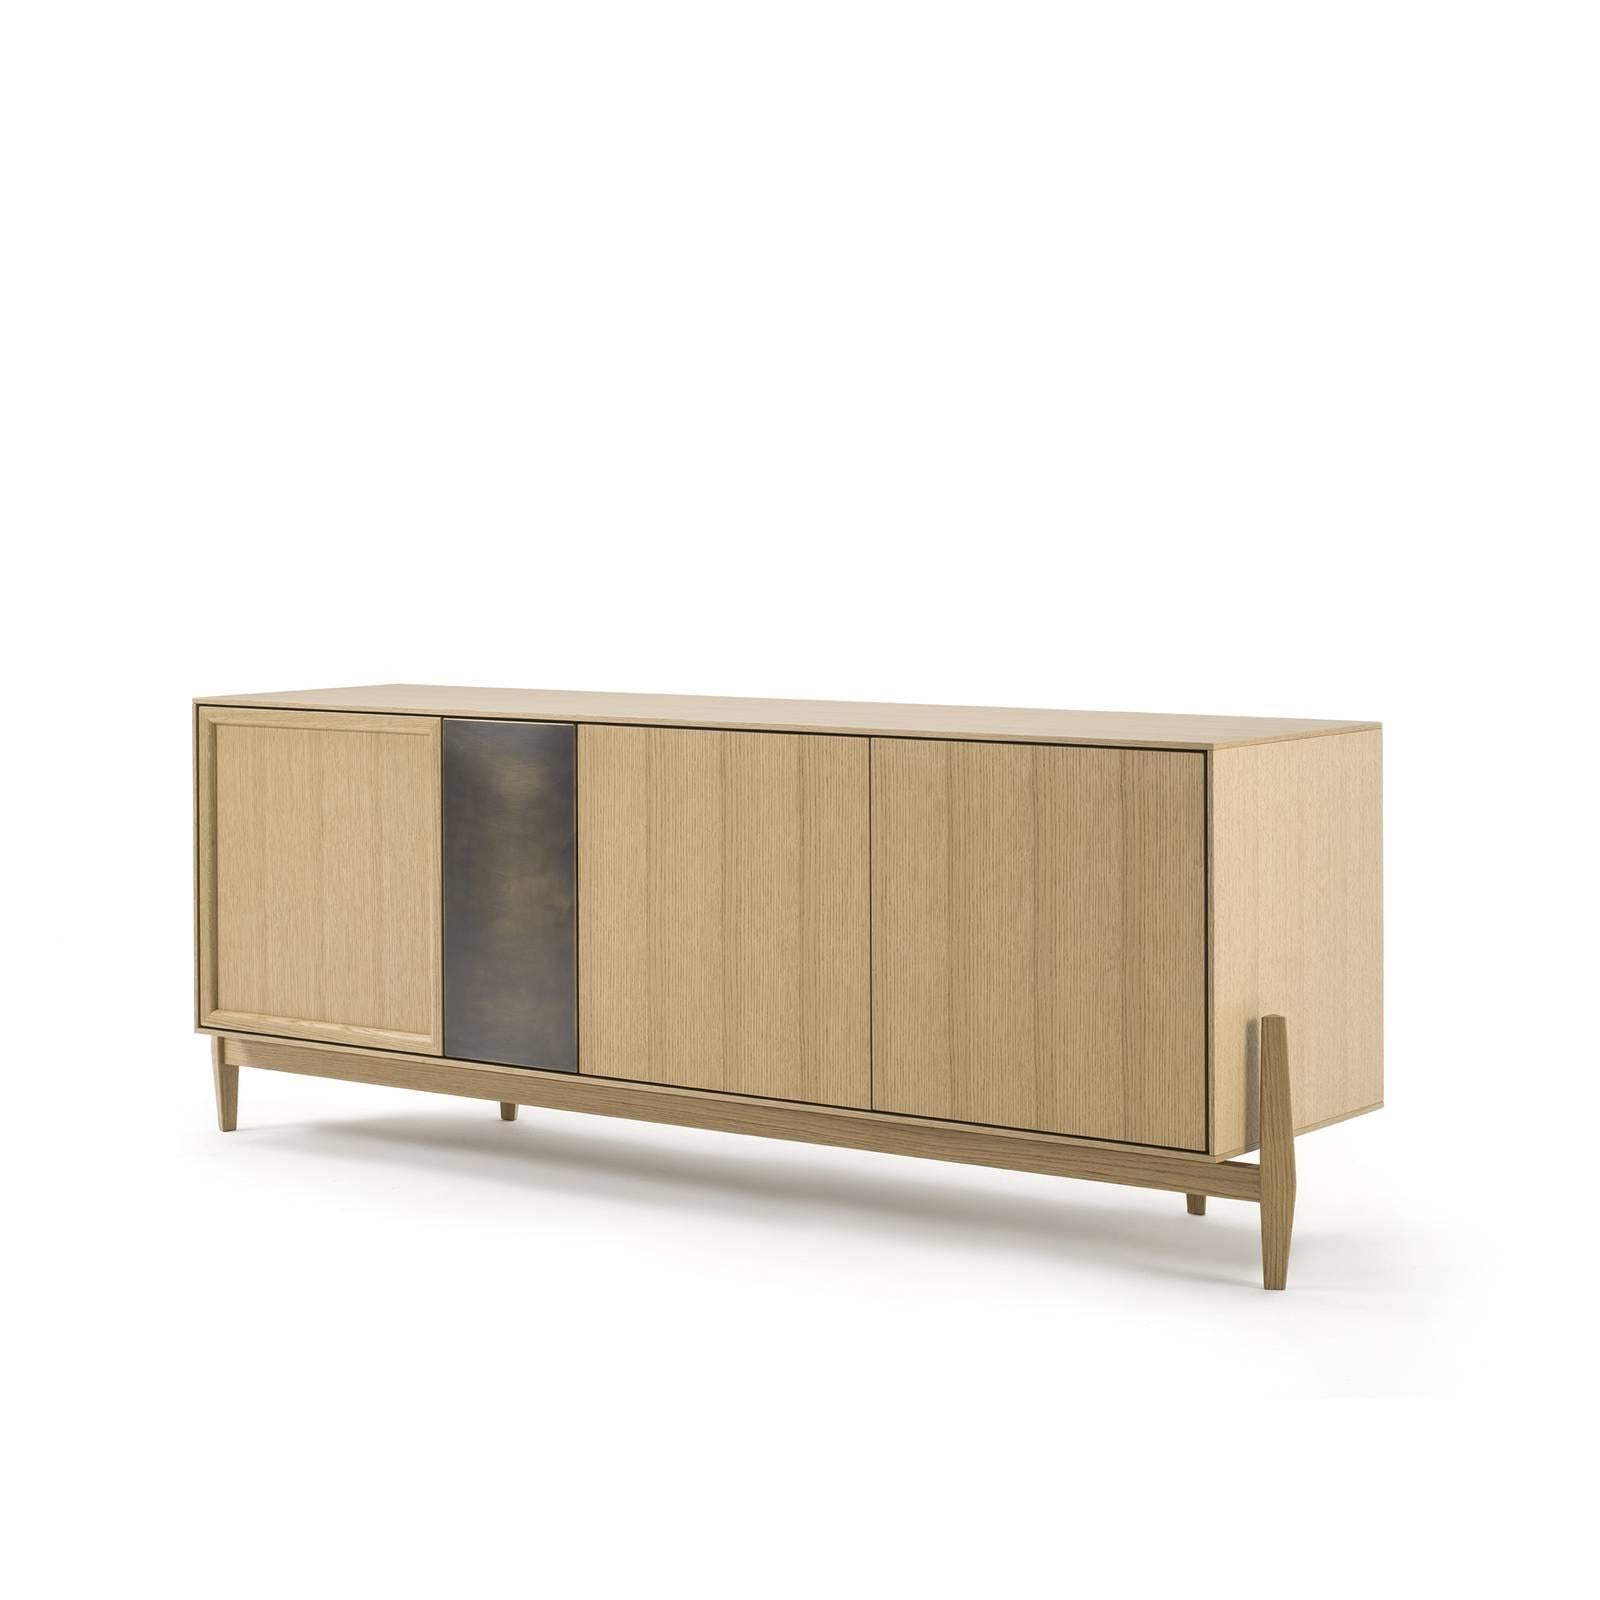 This stunning sideboard is part of the new Crab collection, introduced at the Salone del Mobile event of 2018 Milan Design Week. Entirely crafted of durmast wood, this sideboard is defined by a unique load-bearing structure with four pincer elements